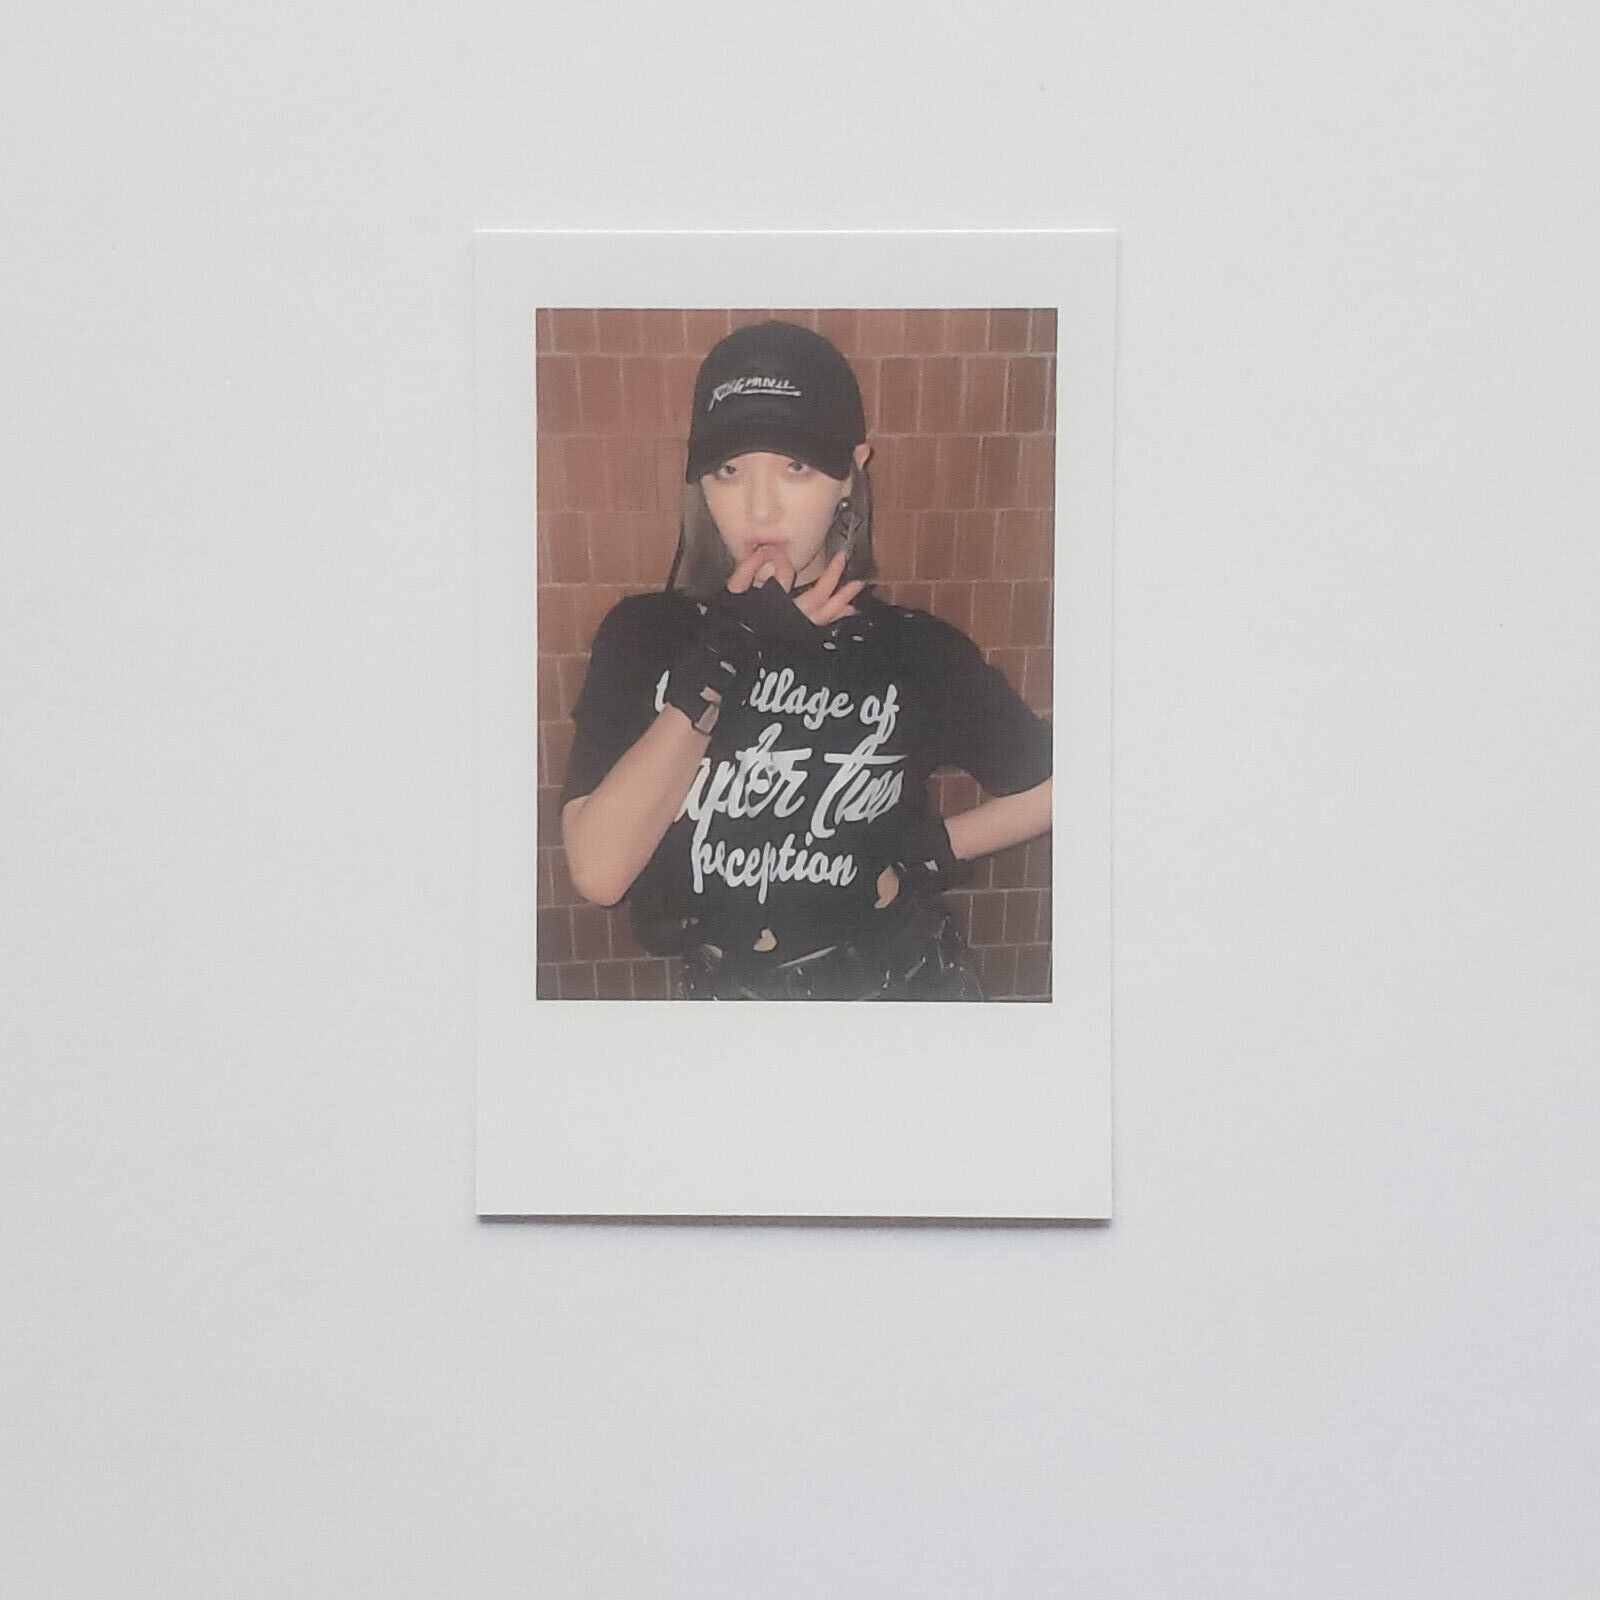 billlie 'the billage of perception: chapter two' album polaroid photocard [1/15]